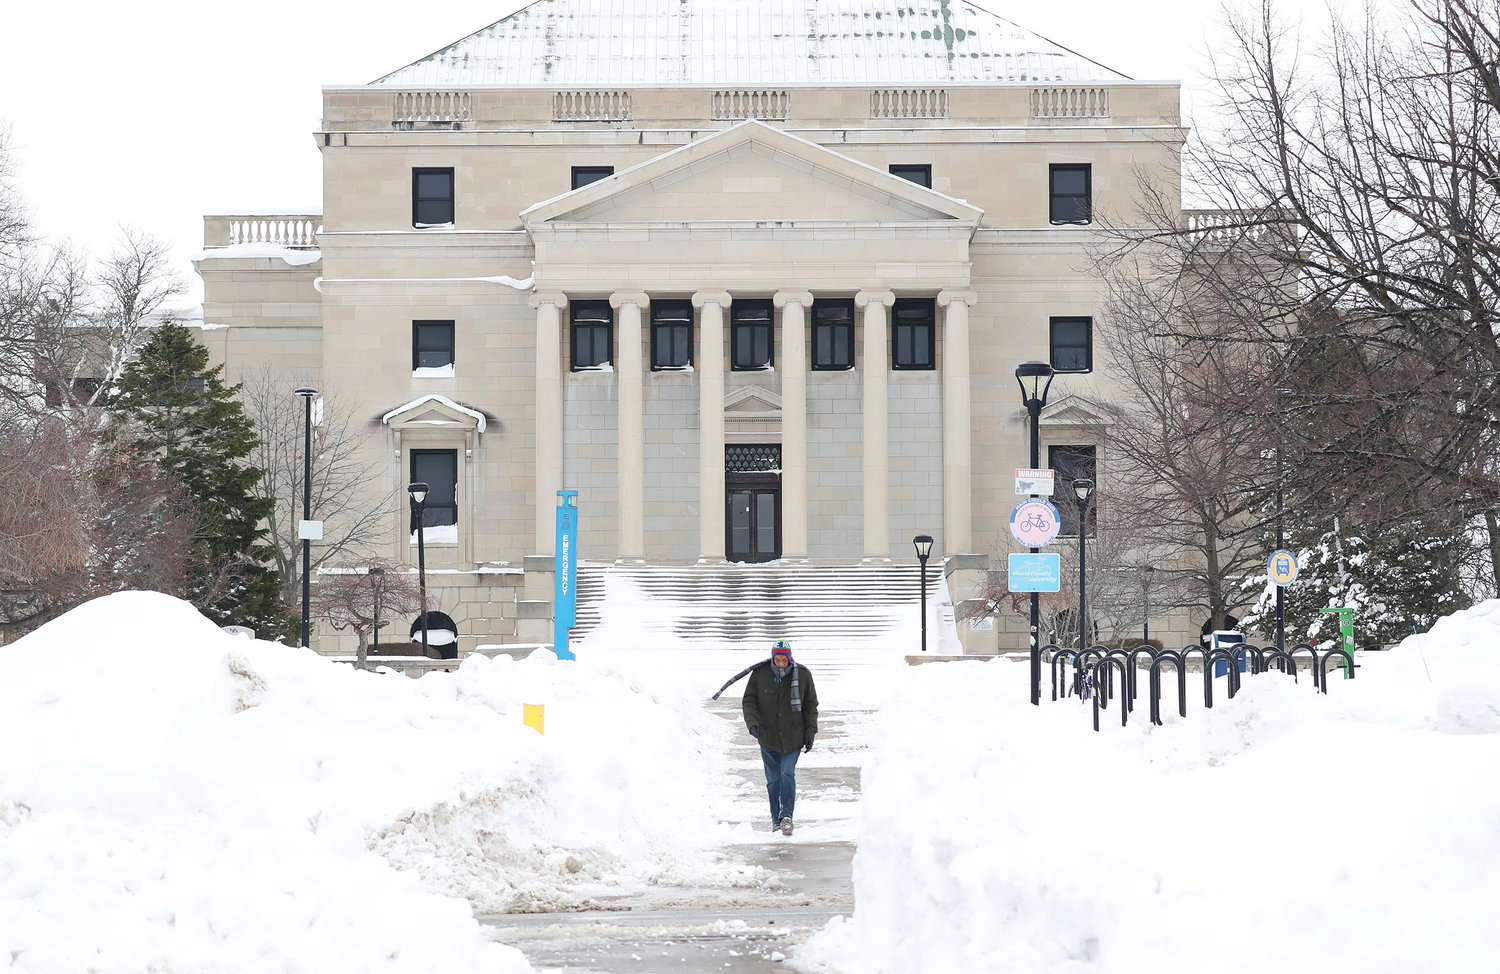 Gerald Crosby walks down a sidewalk surrounded by snow on University at Buffalo campus in Buffalo, N.Y., on Tuesday, Dec. 27, 2022. This comes days after a blizzard hit four Western New York counties. (Joseph Cooke/The Buffalo News via AP)